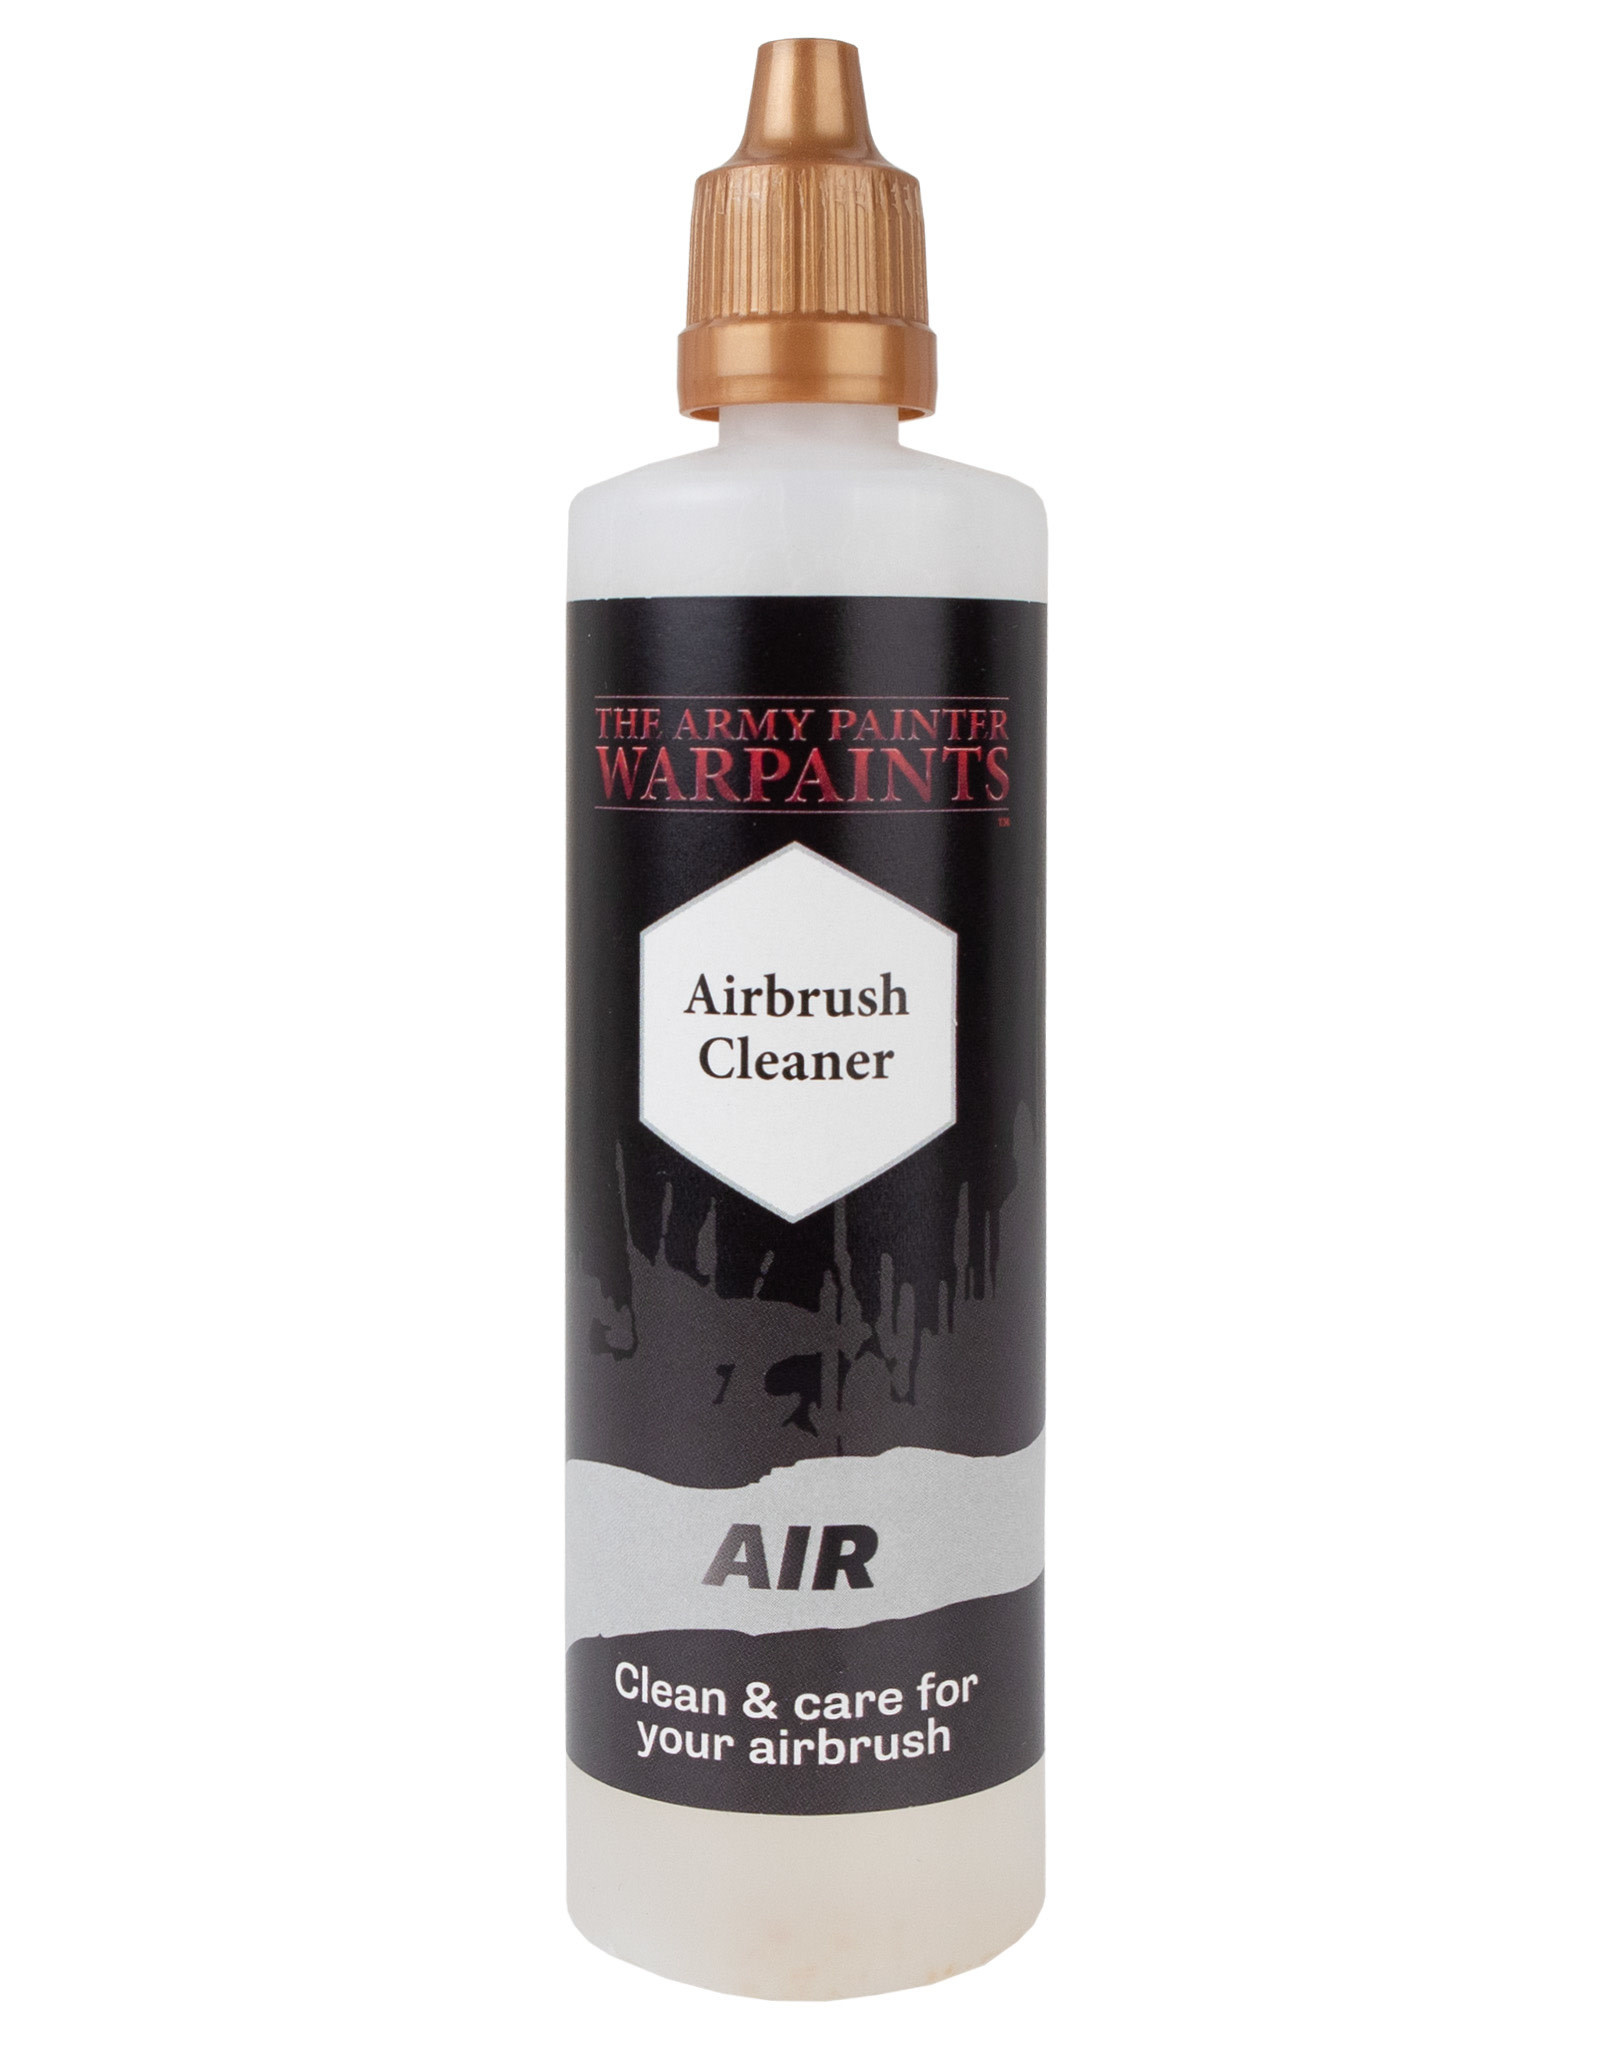 The Army Painter The Army Painter Airbrush Cleaner